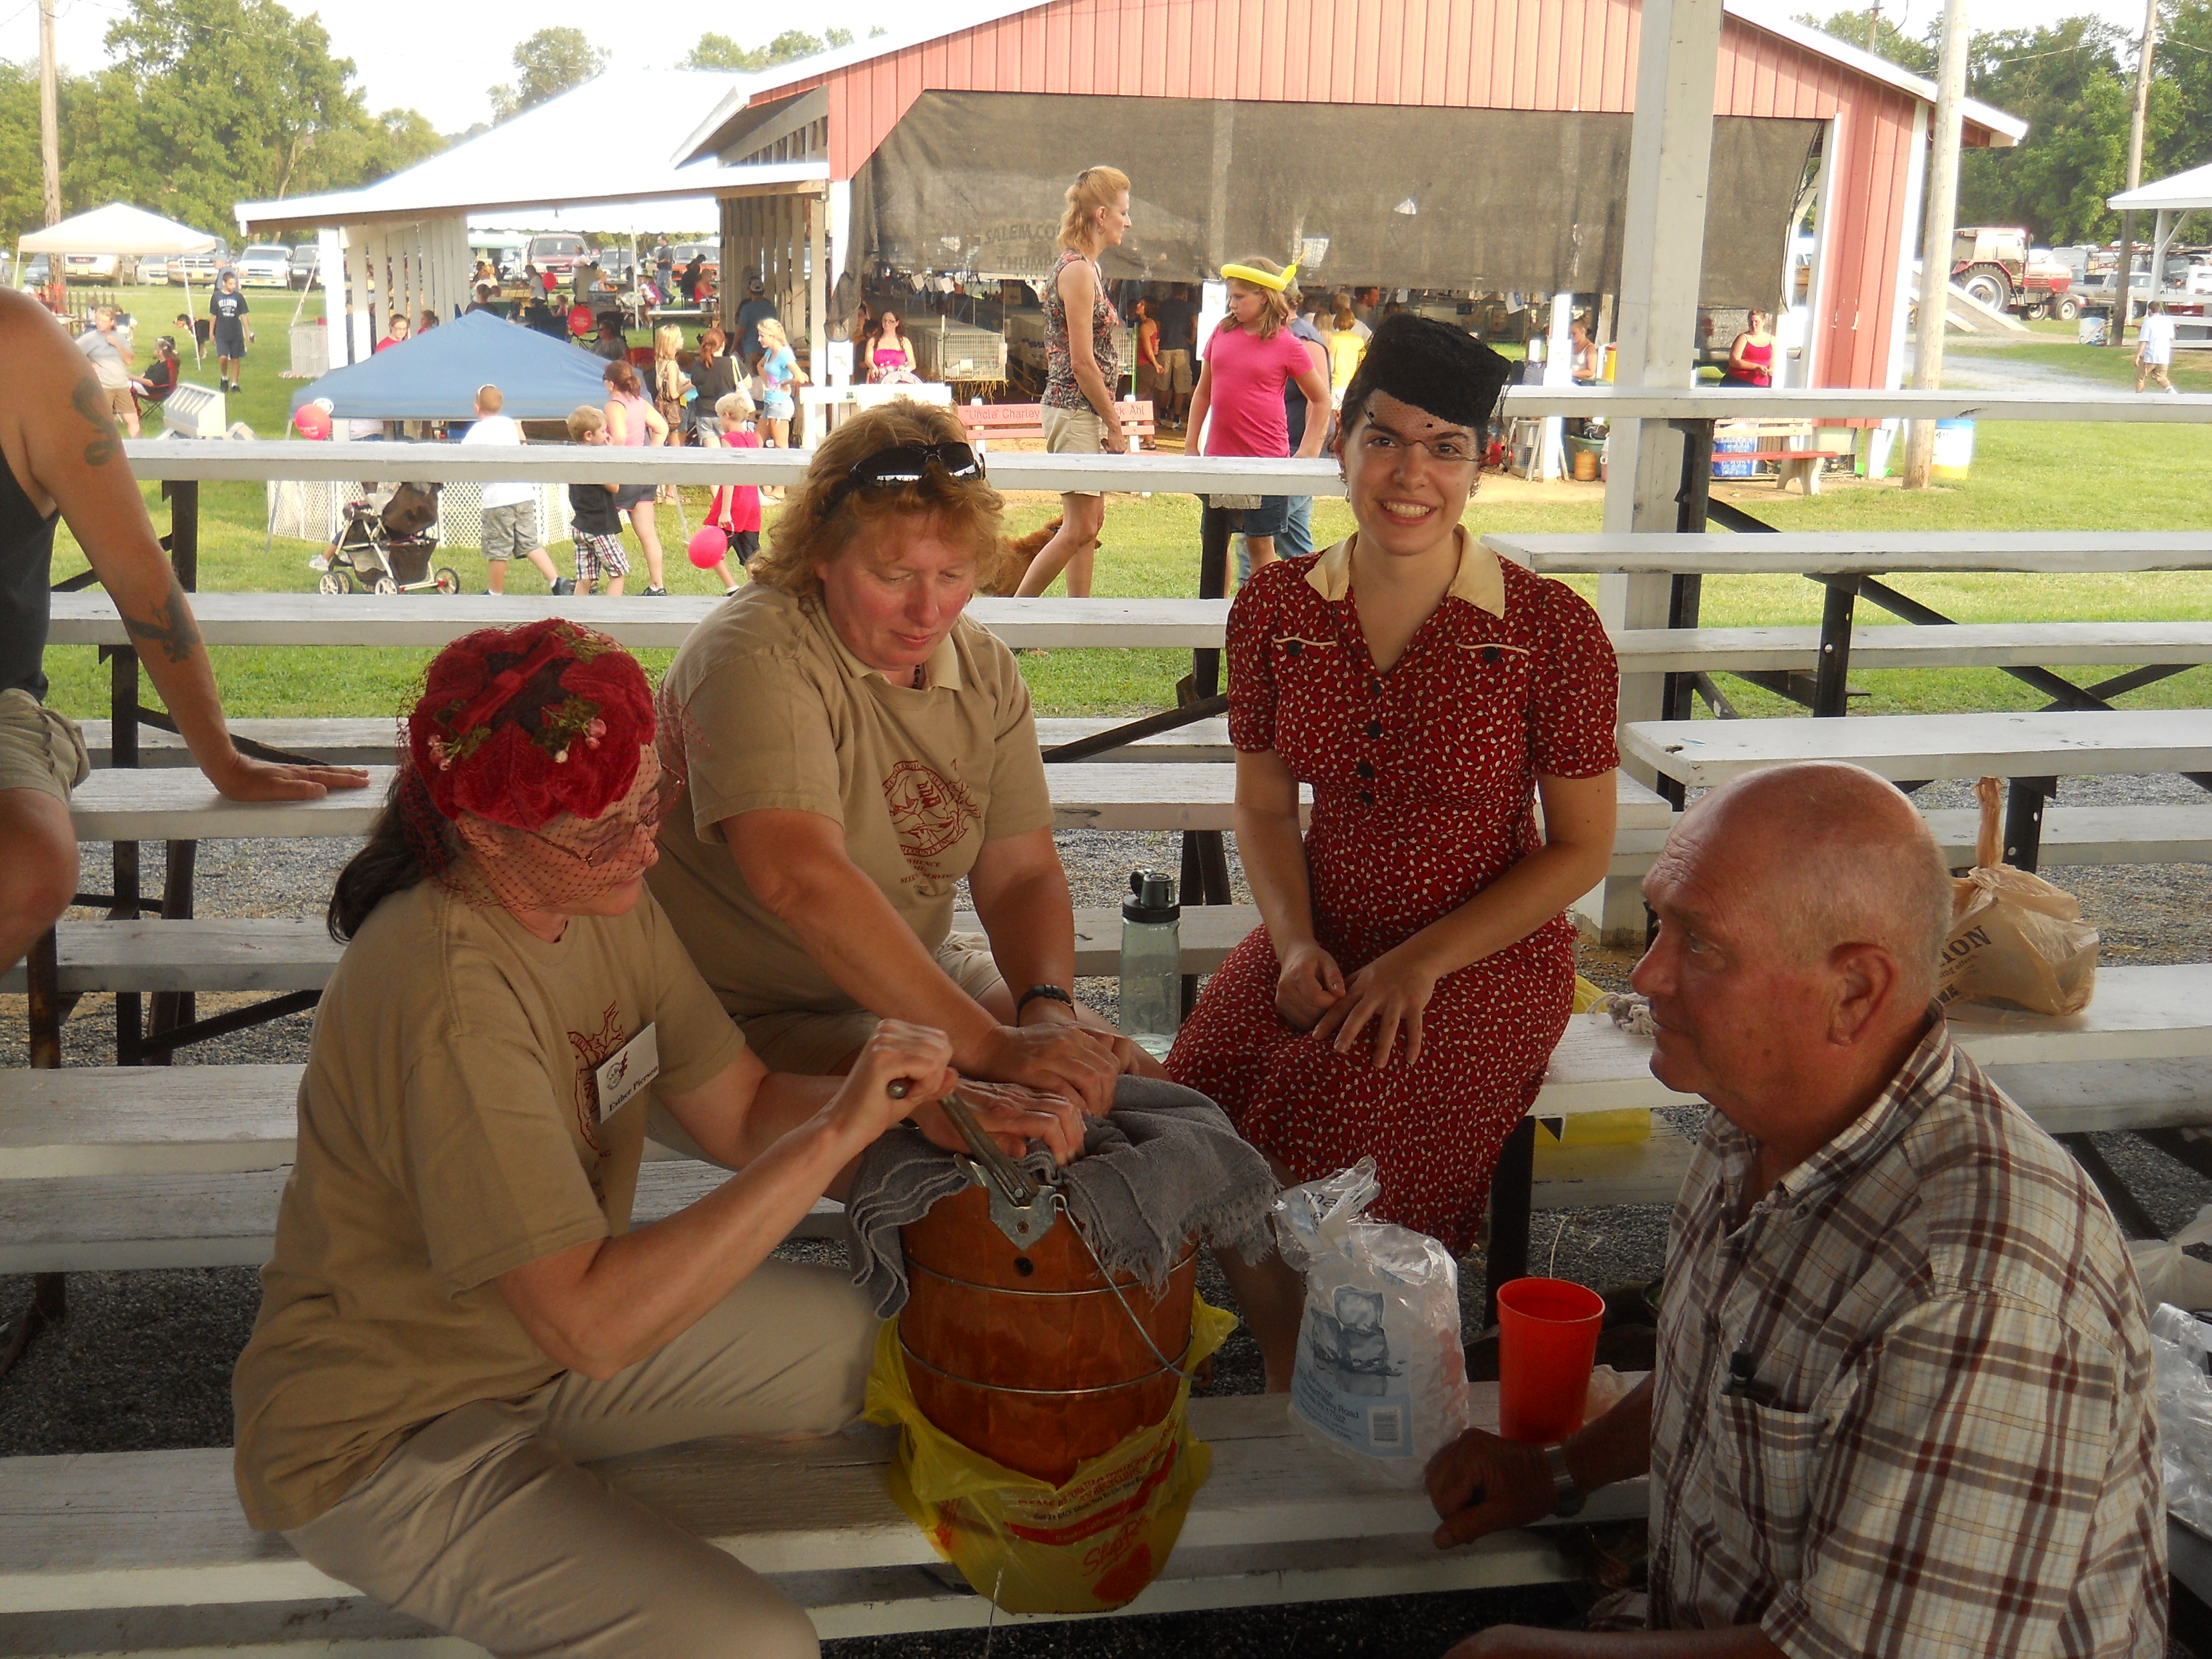 Once again, we participated in the Ice Cream Making contest, with a touch of vintage hats and clothing.